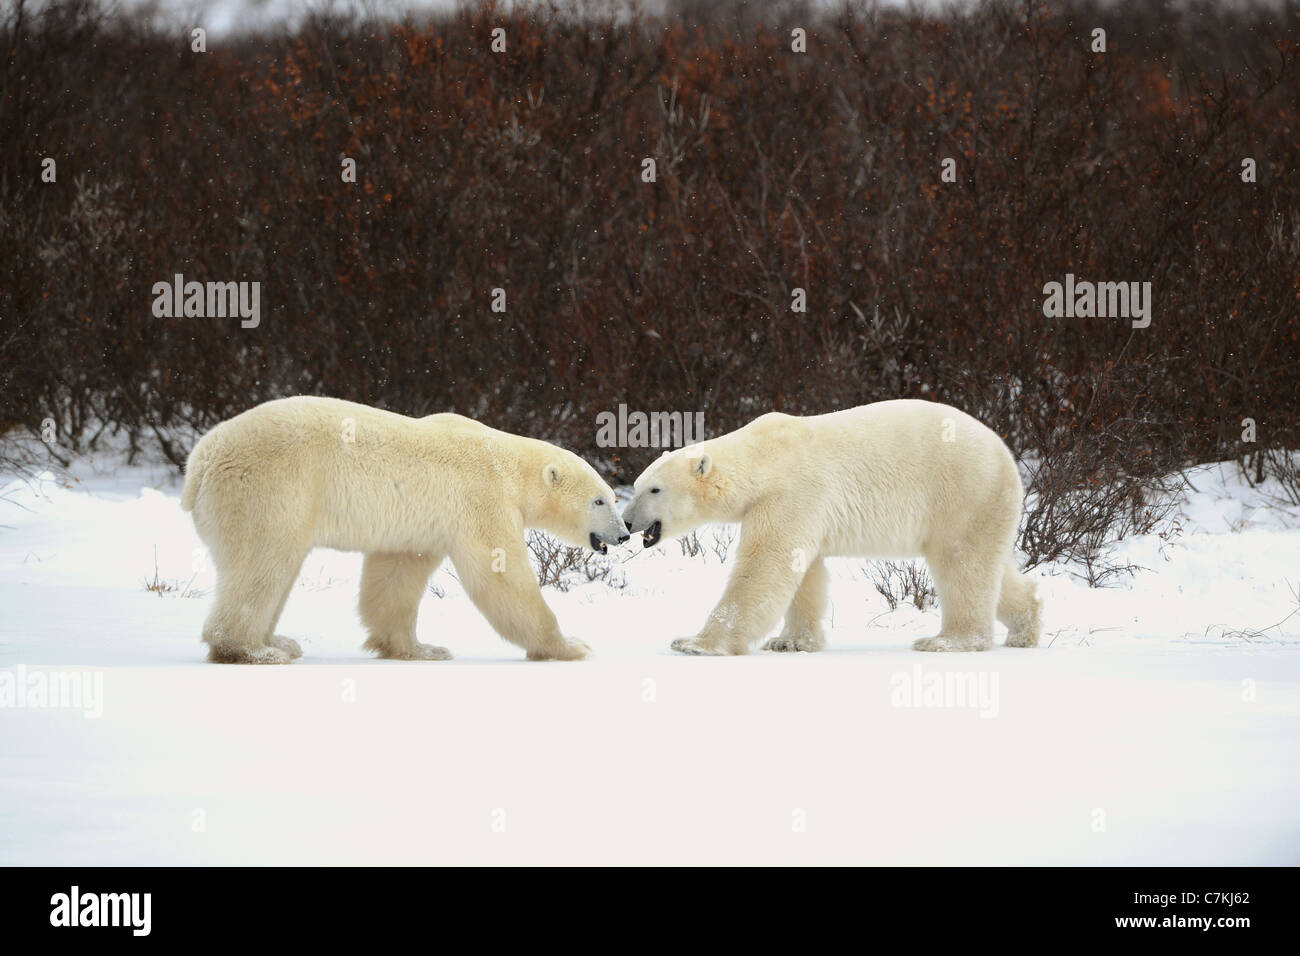 Dialogue of polar bears. Two polar bears have met against a dark bush and are measured by mouths. Stock Photo